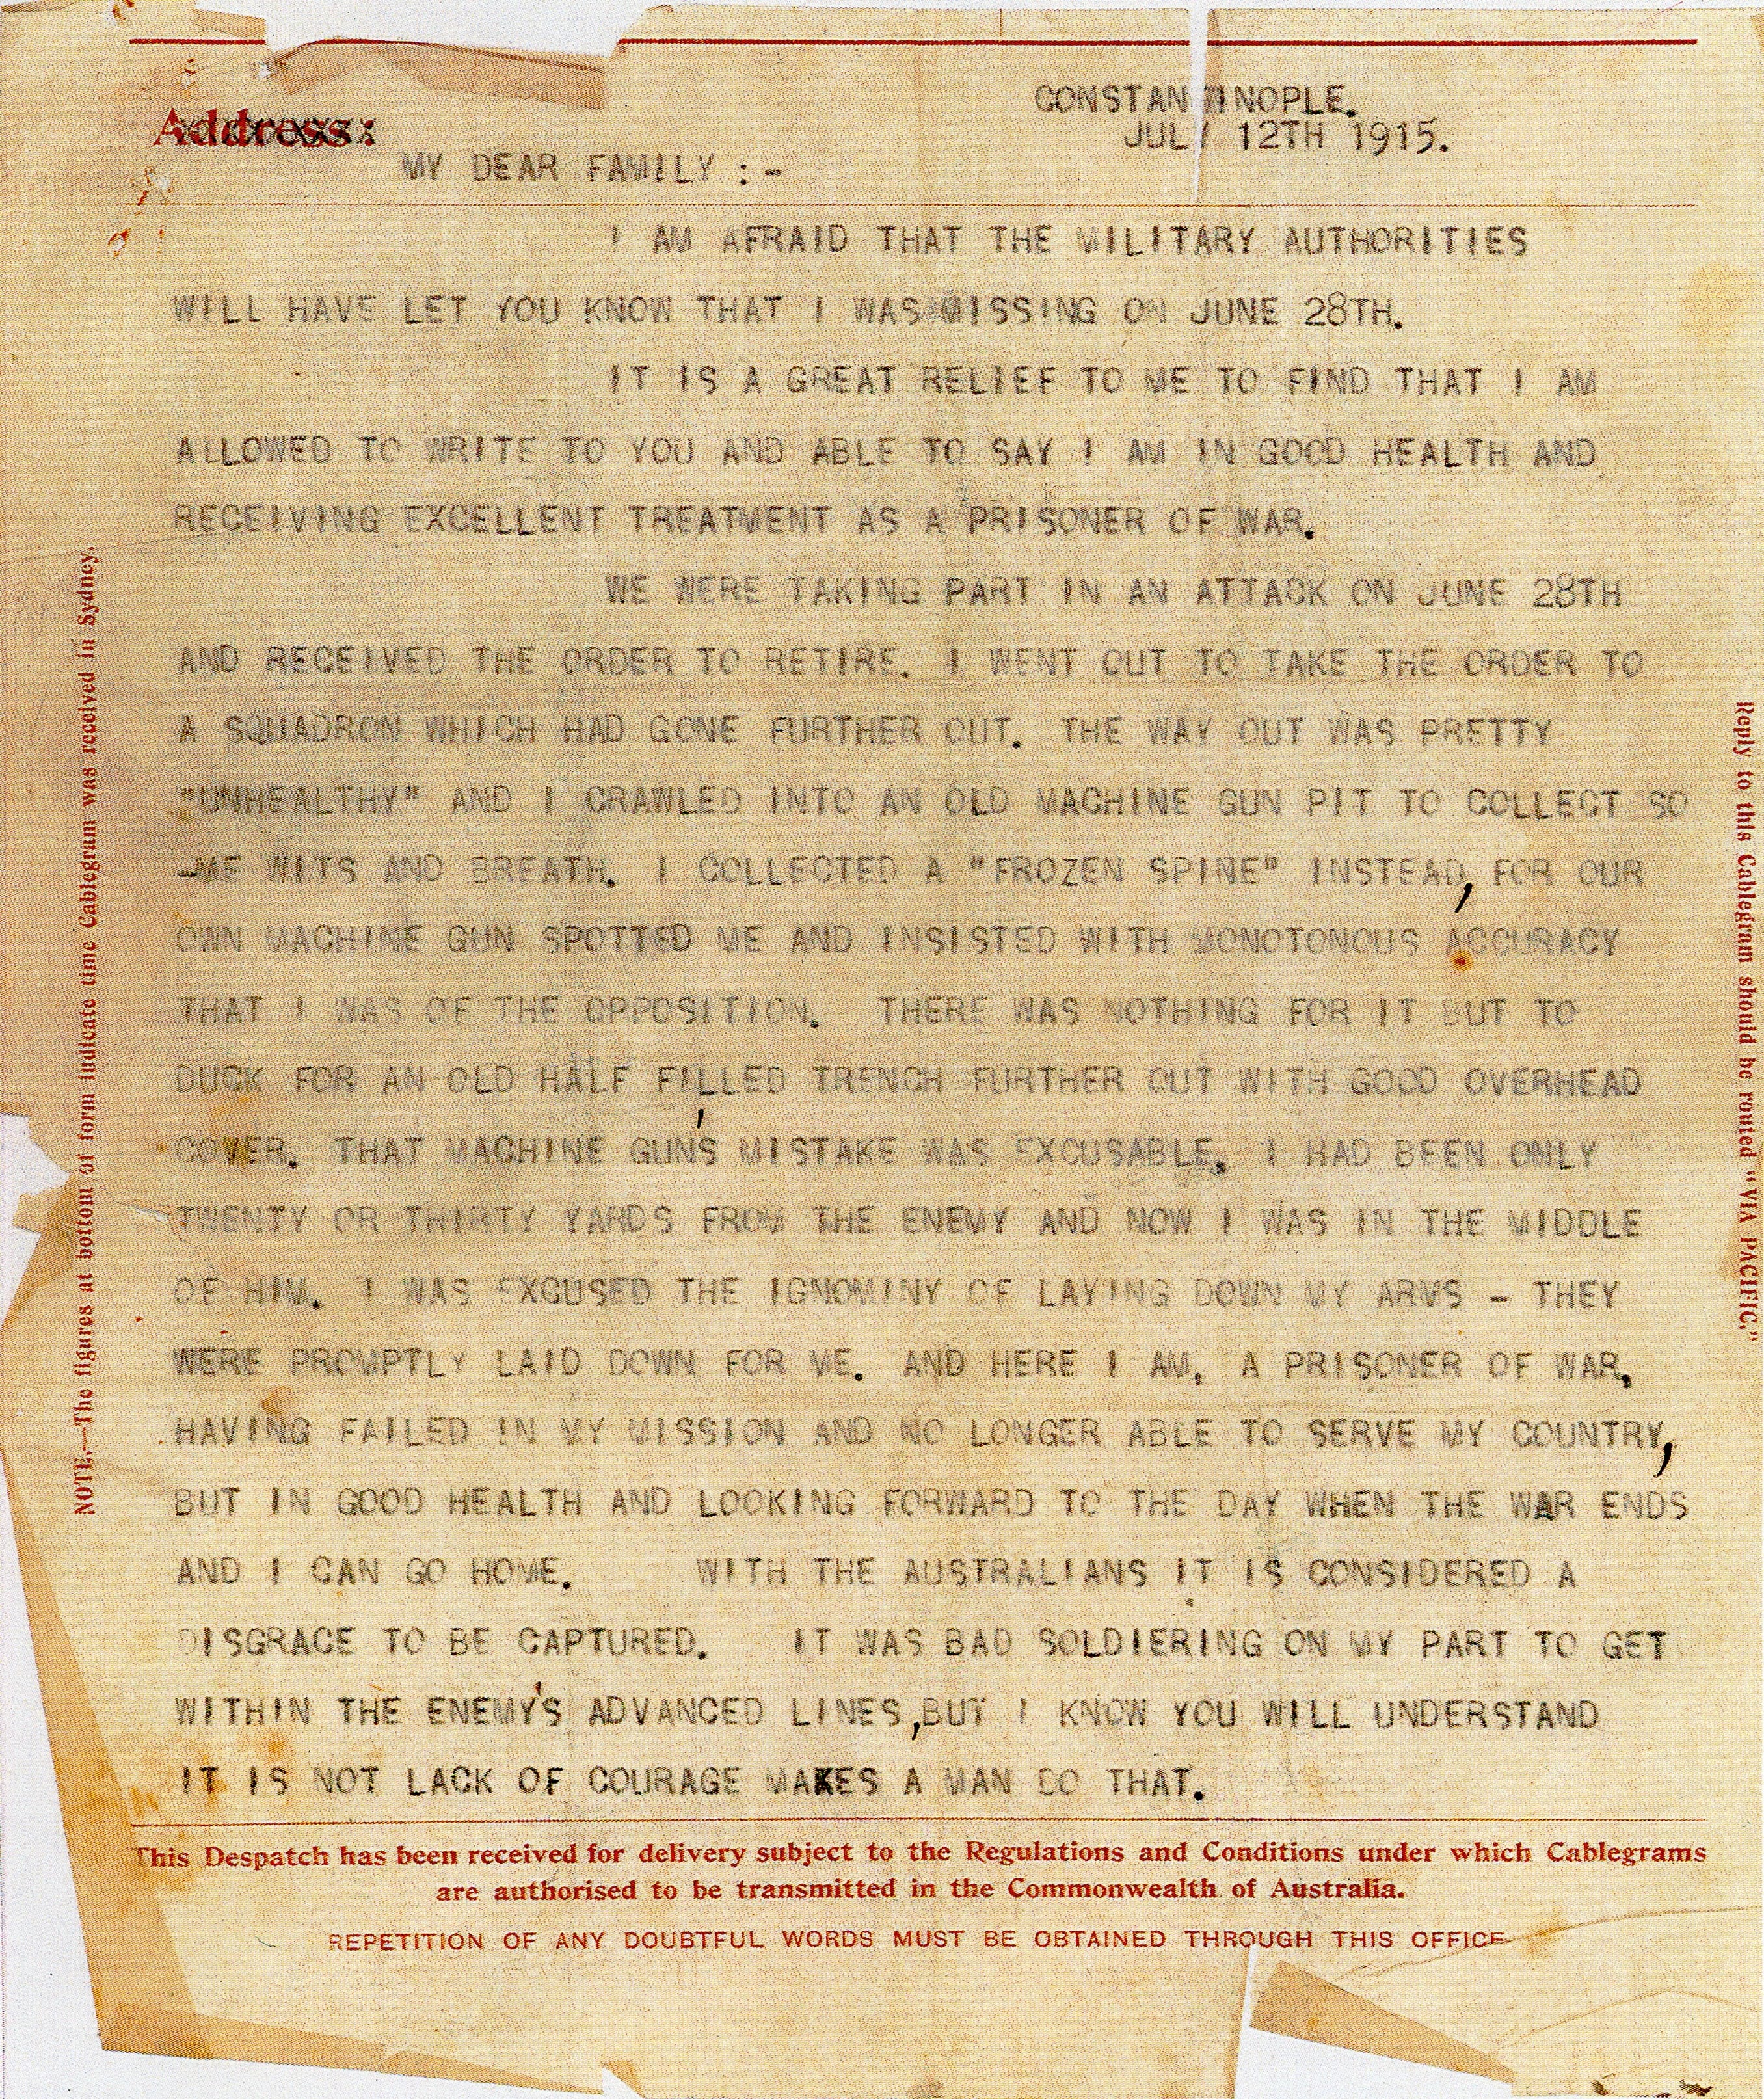 Letter dated 12 July 1915 from Maurice Delpratt to his family from Constantinople, confirming that he was now a prisoner of war, John Oxley Library, State Library of Queensland, Acc. 28115/7